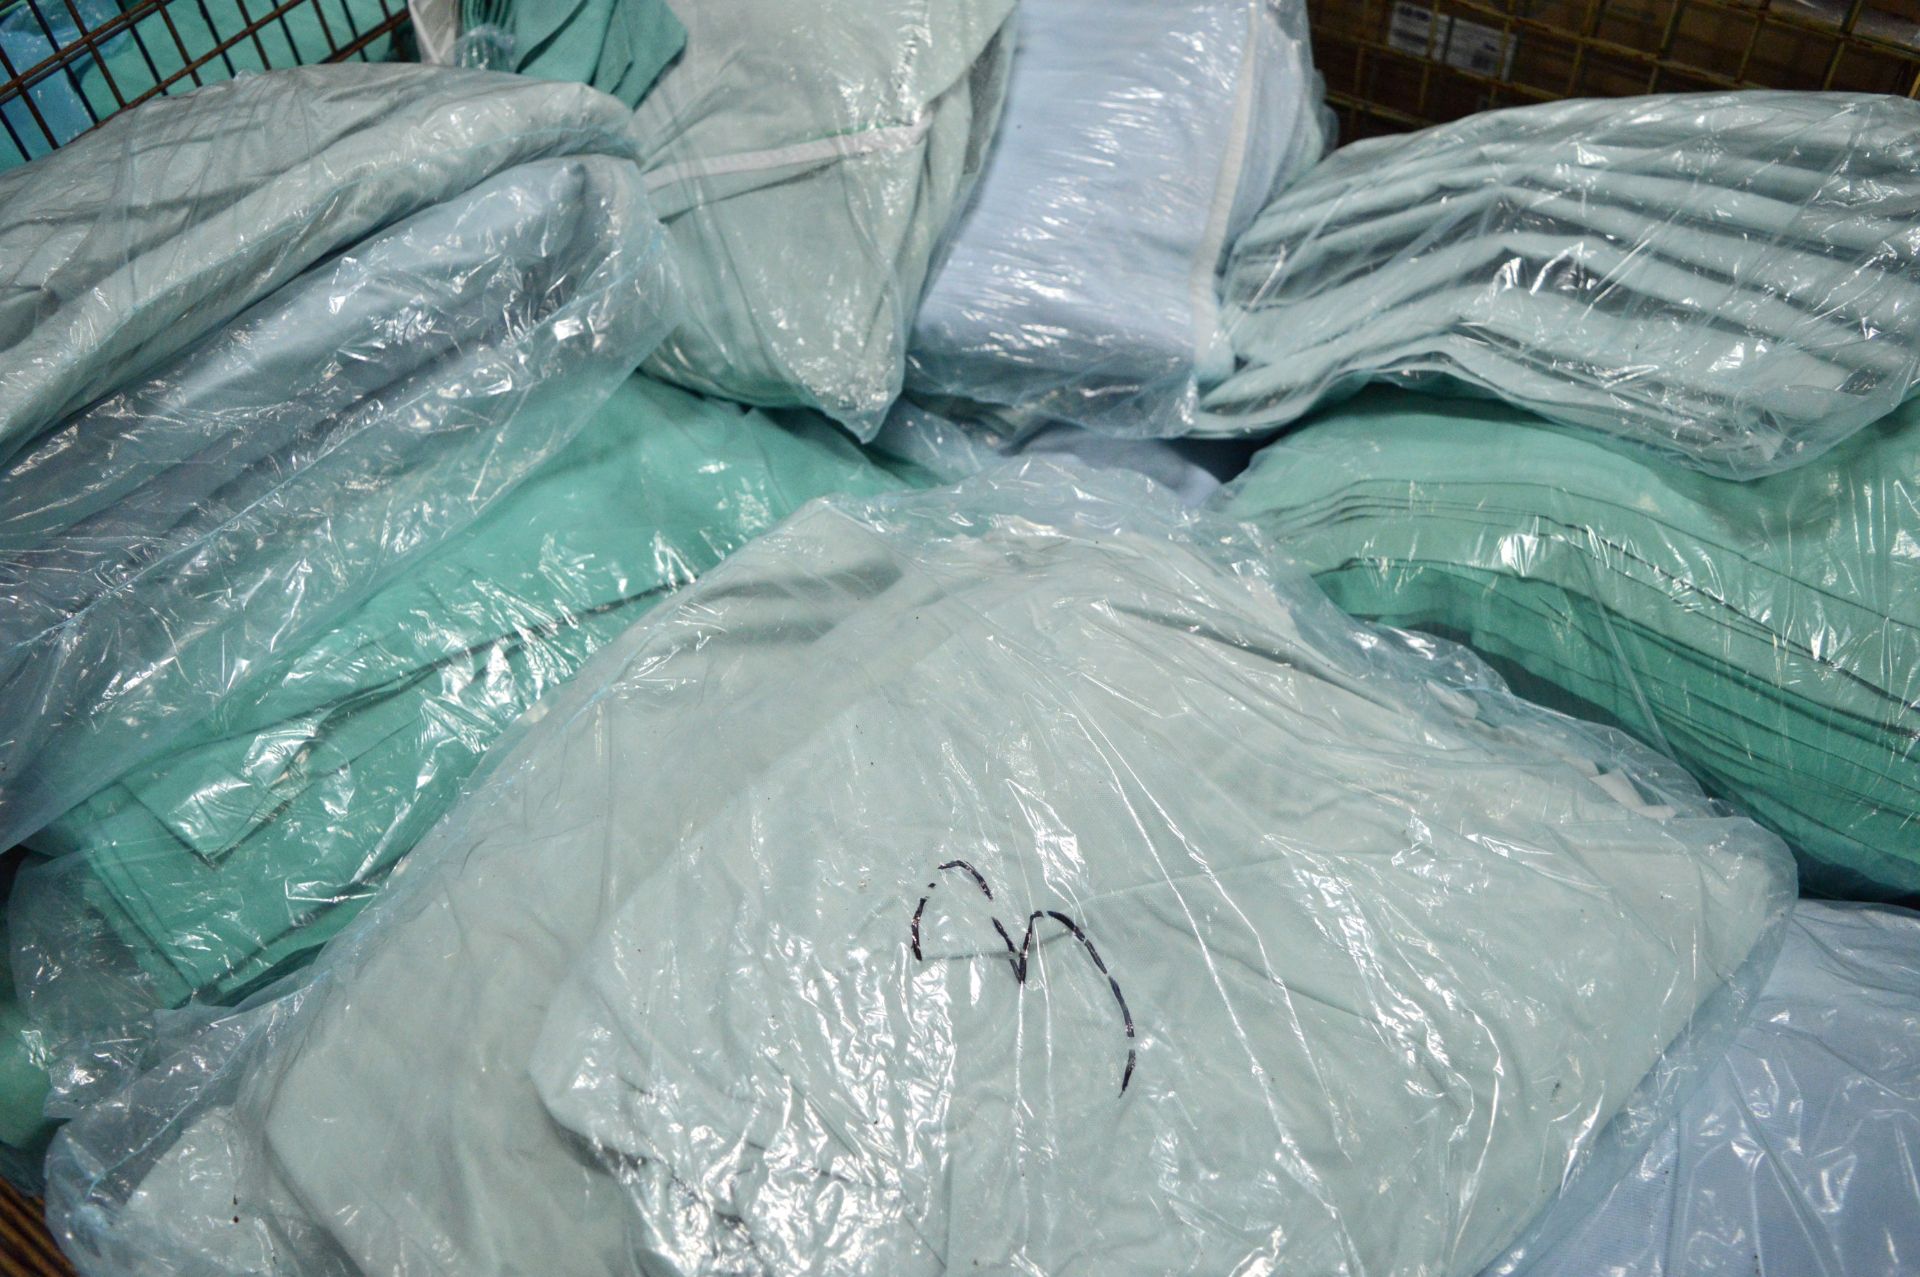 21x Packs of Bed Linen. - Image 2 of 2